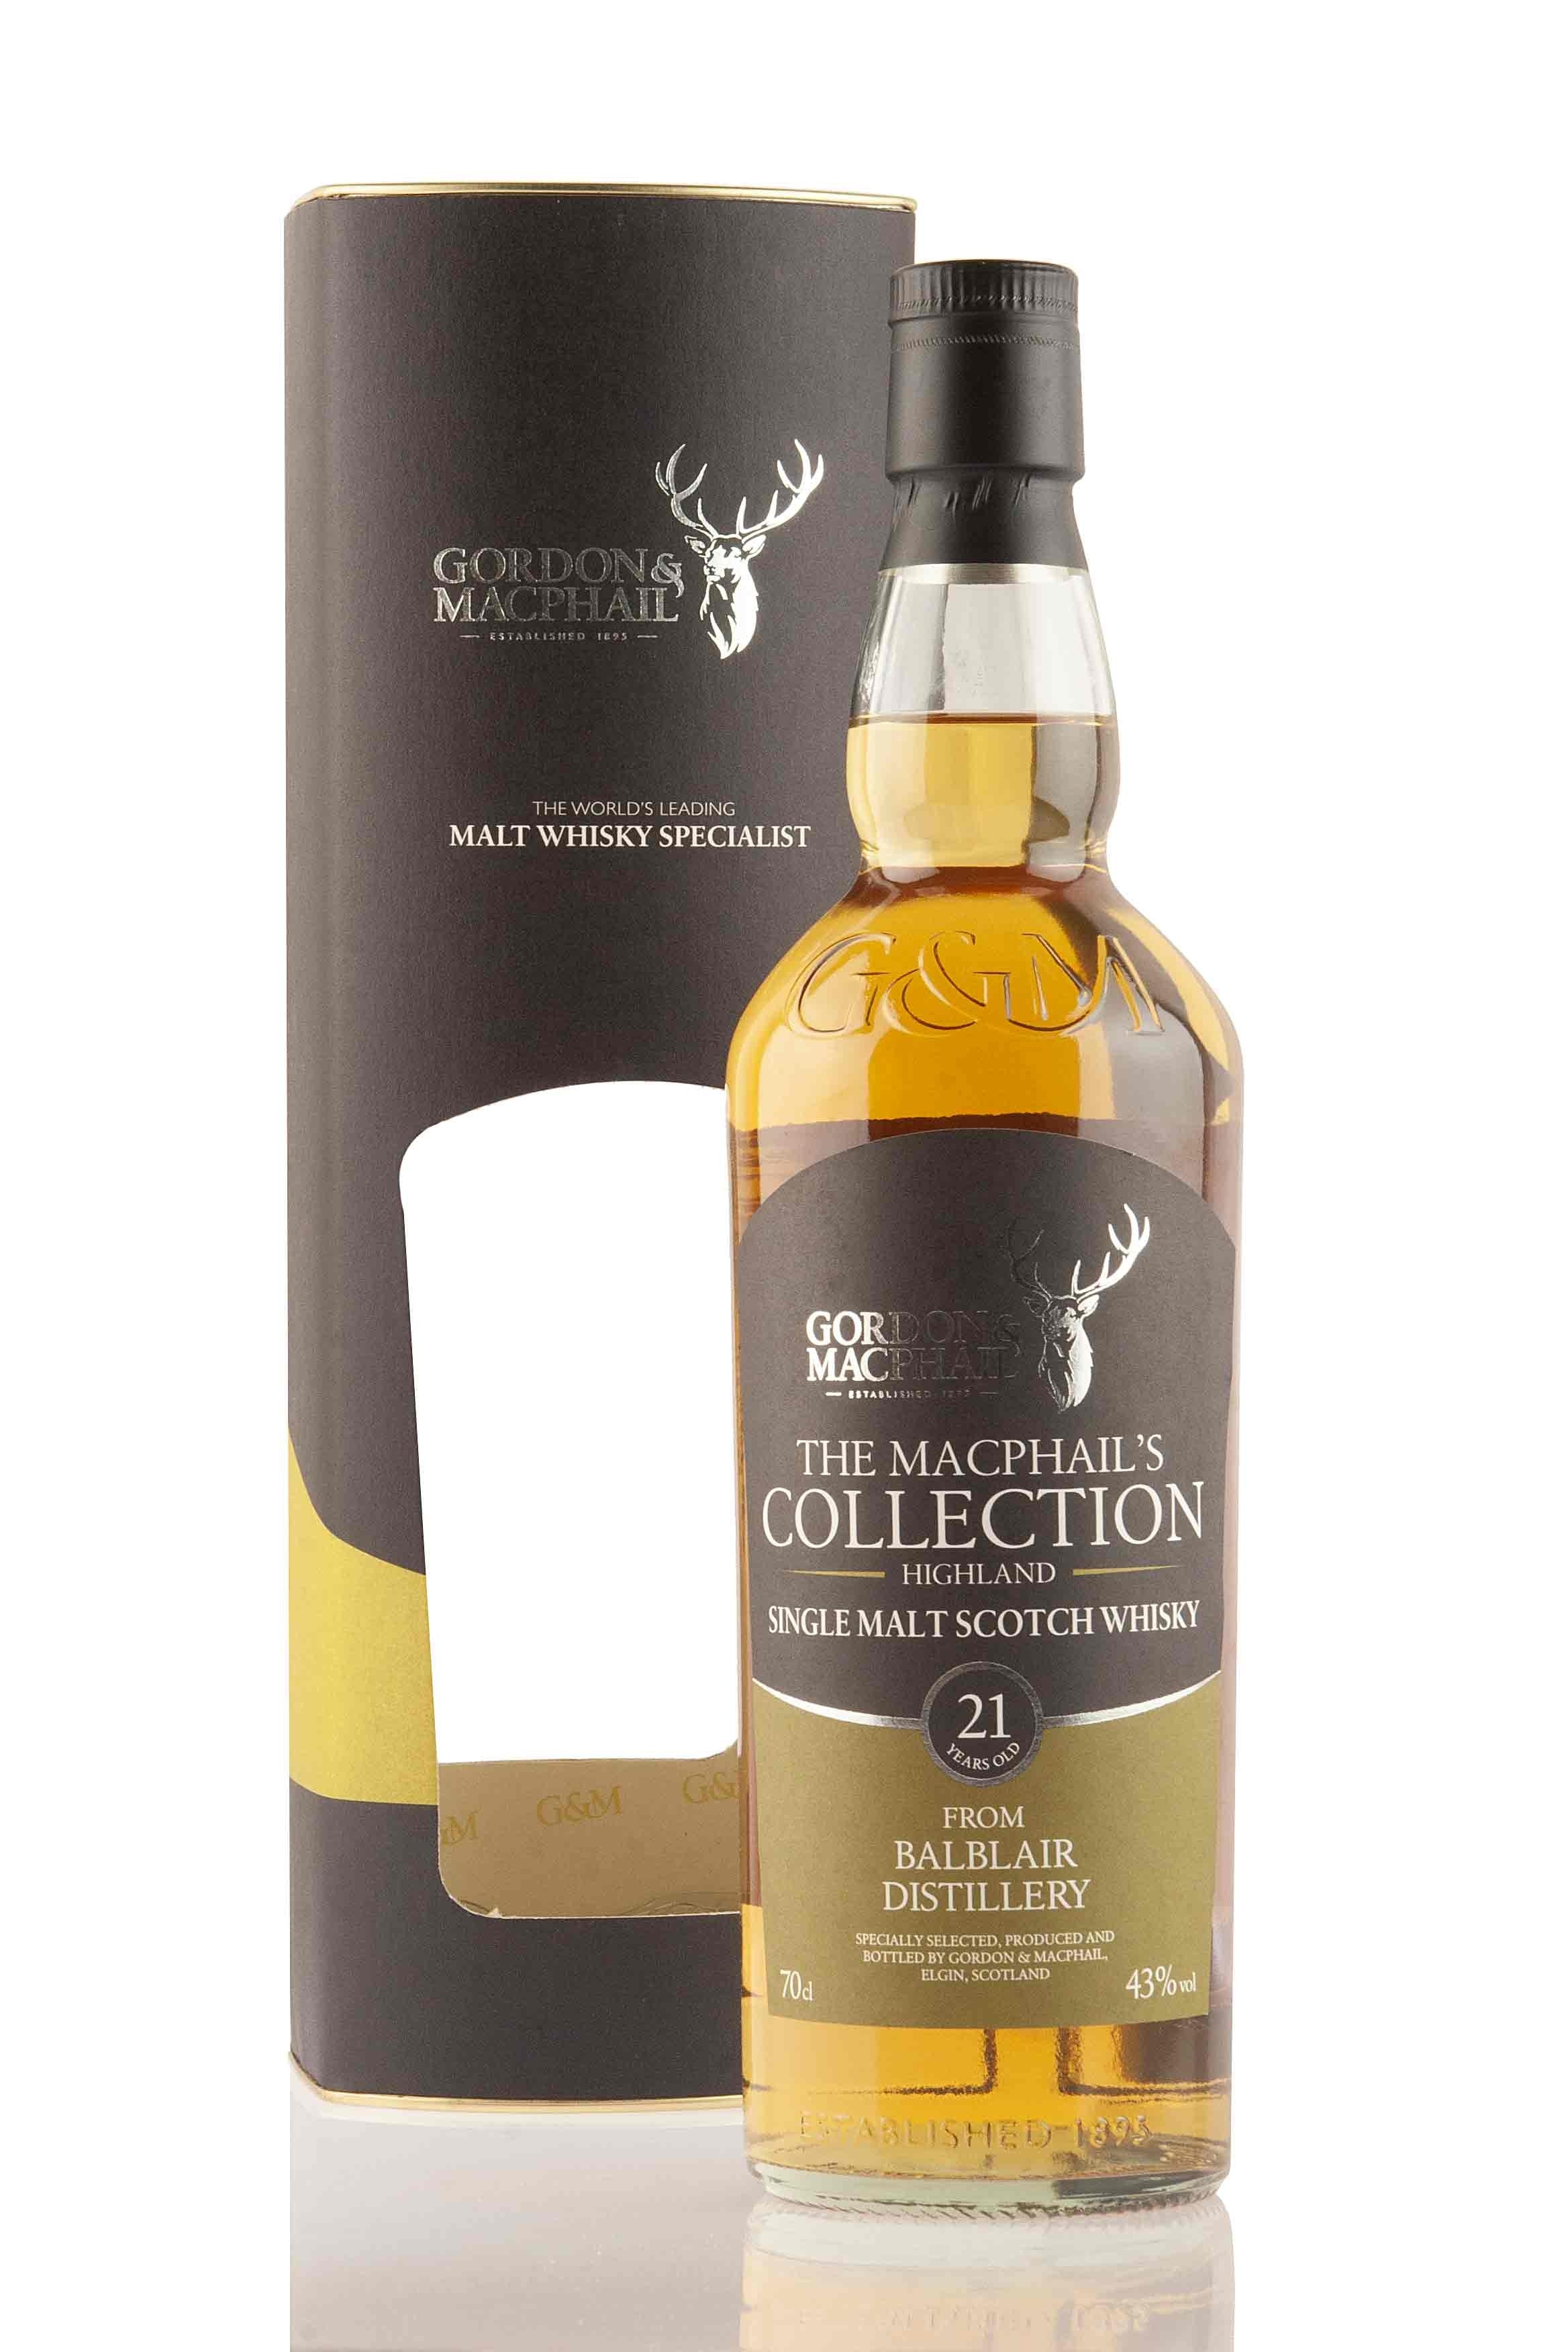 Balblair 21 Year Old - The MacPhail's Collection (G&M)